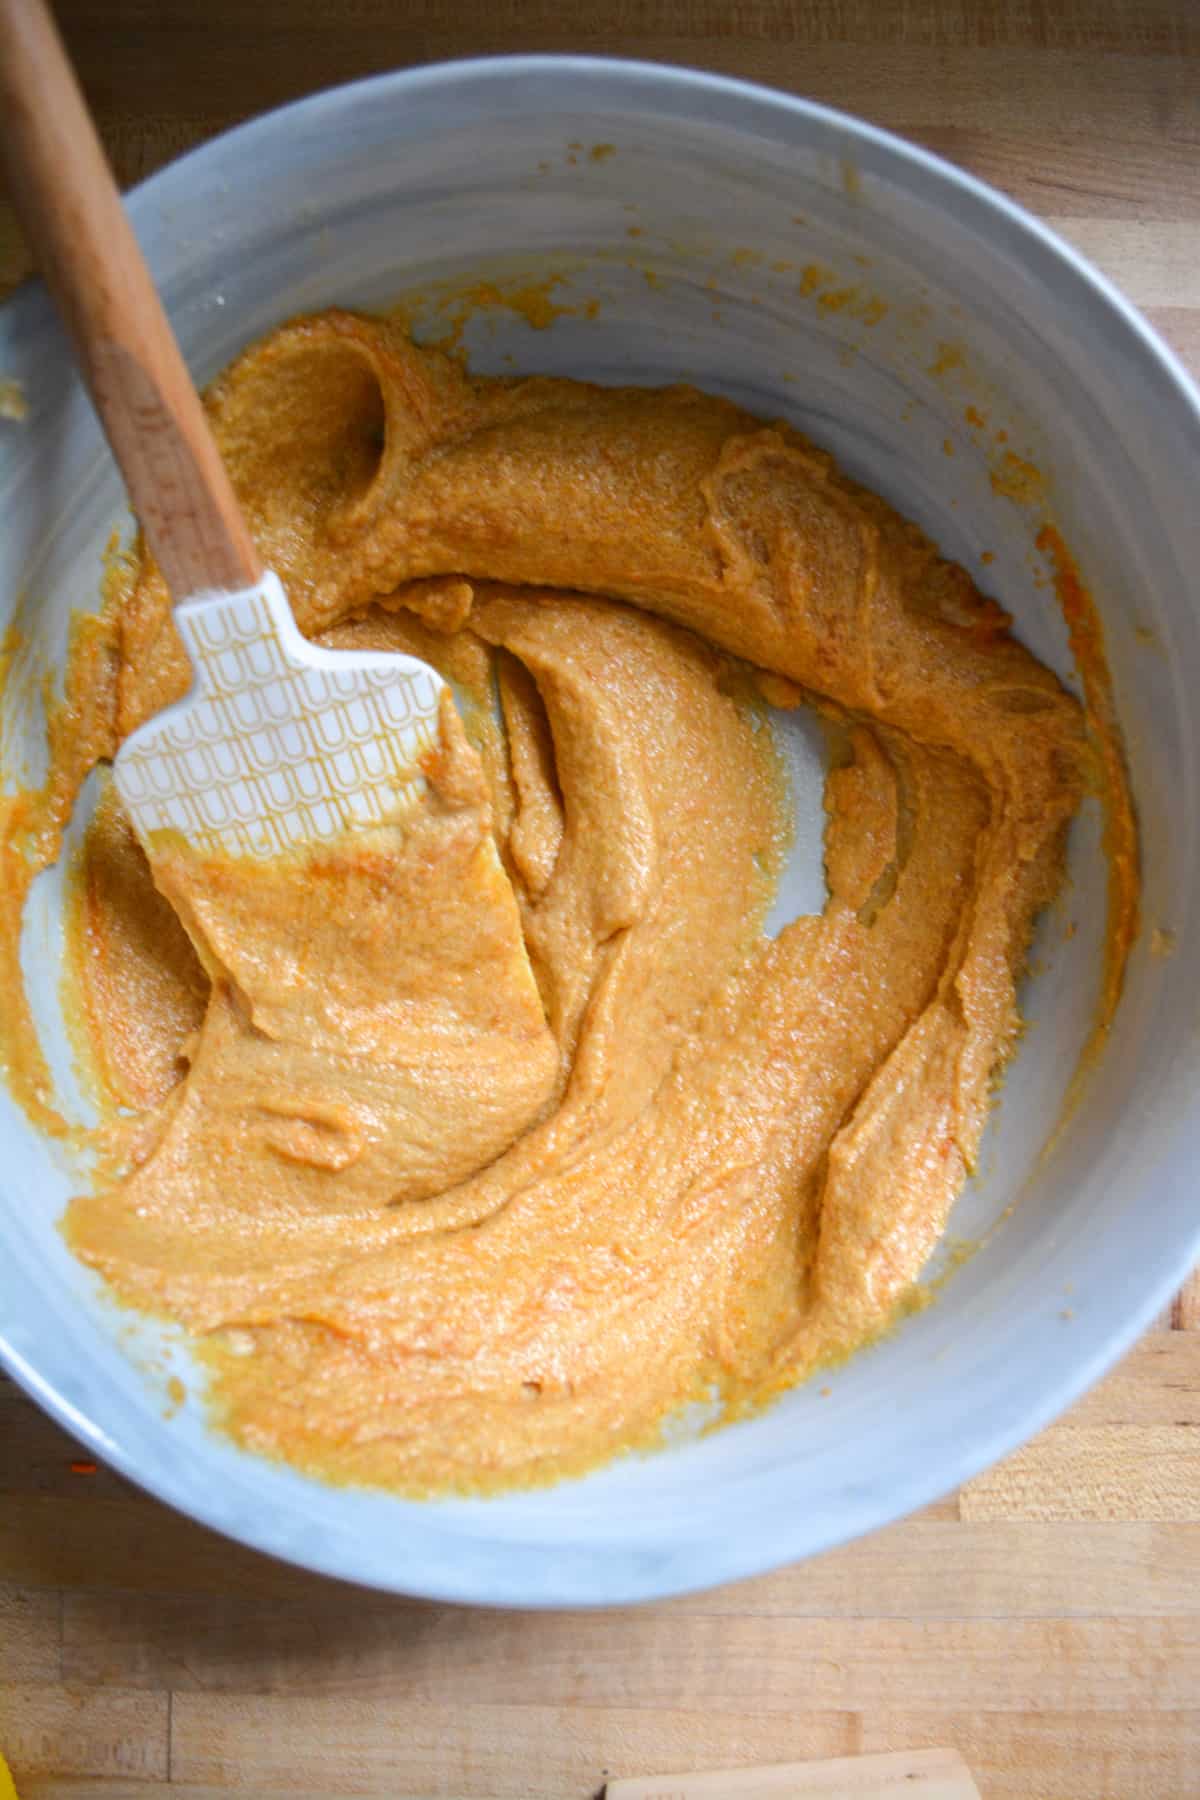 Pumpkin puree mixed into the vegan butter and sugar mixture in a marble bowl